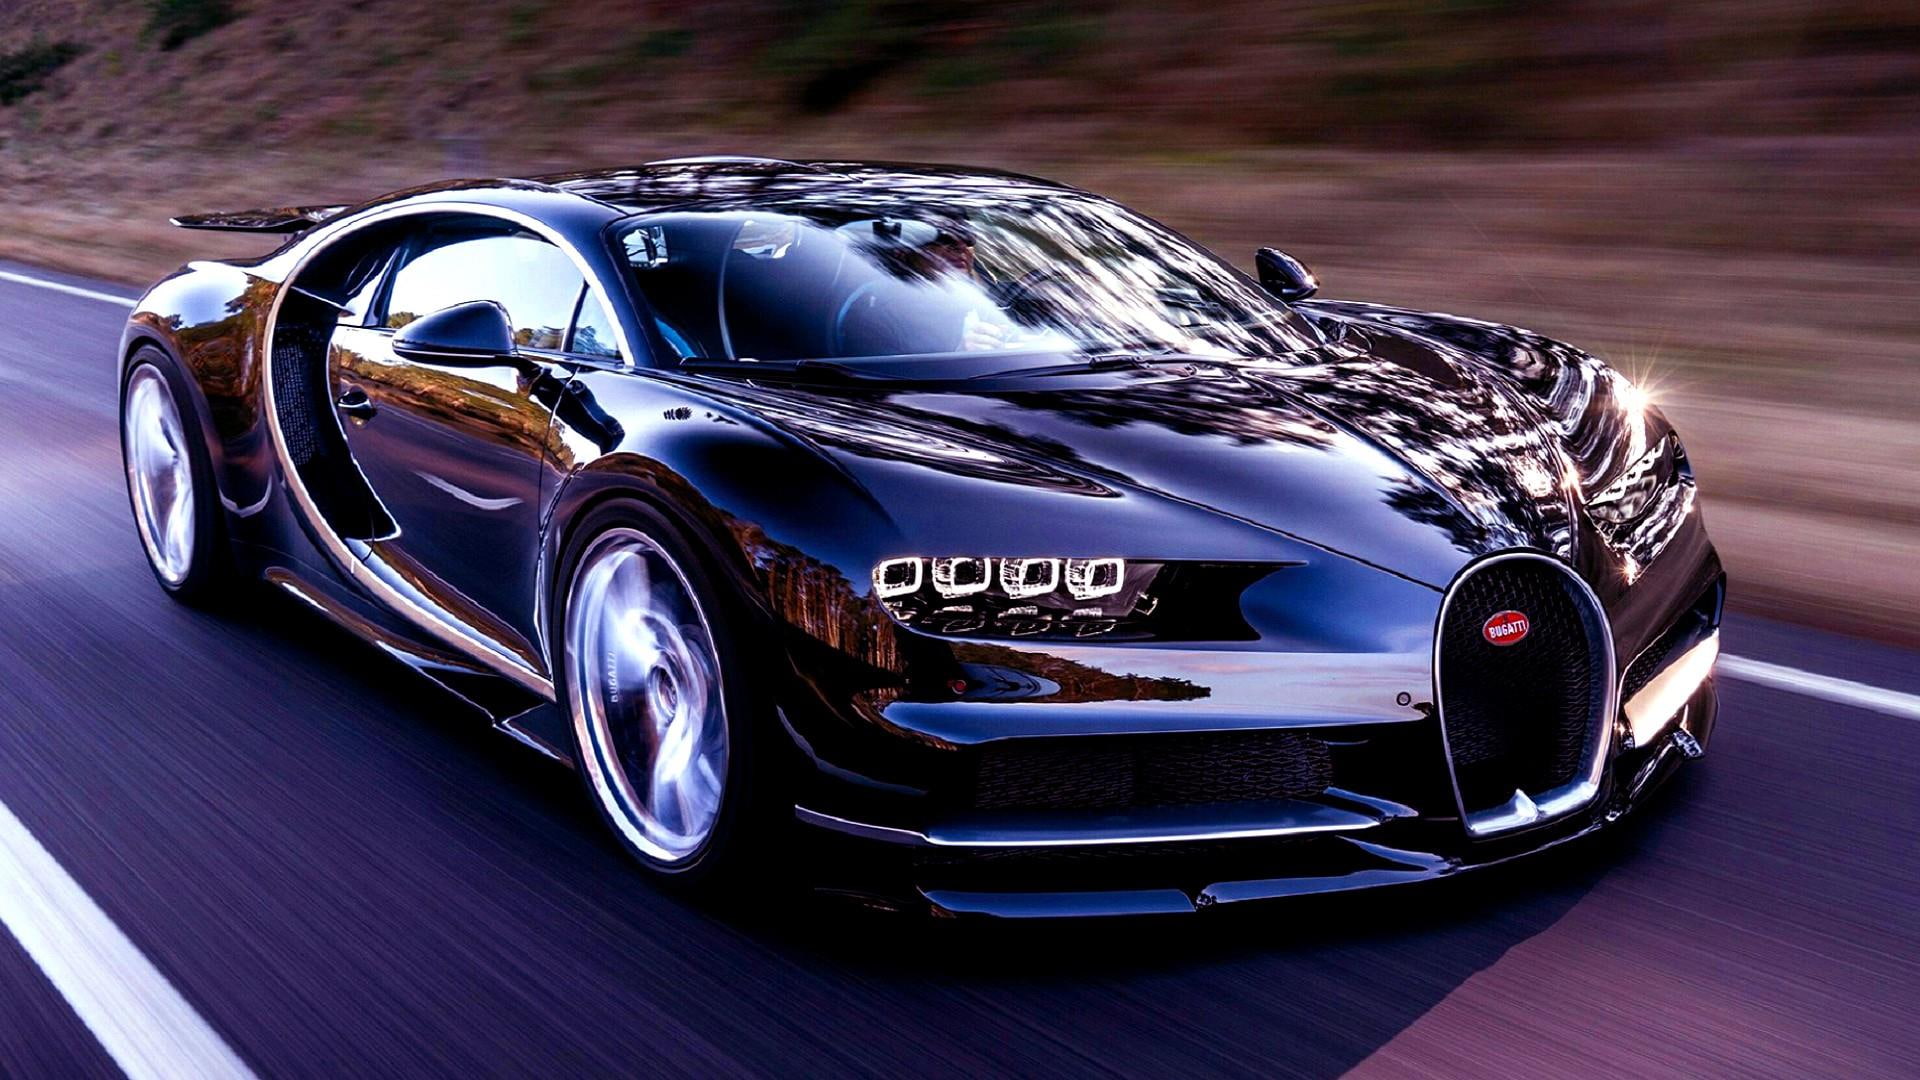 Black Bugatti Chiron Coupe, Dream Car, Motion, Speed - Latest New Cars 2018 , HD Wallpaper & Backgrounds